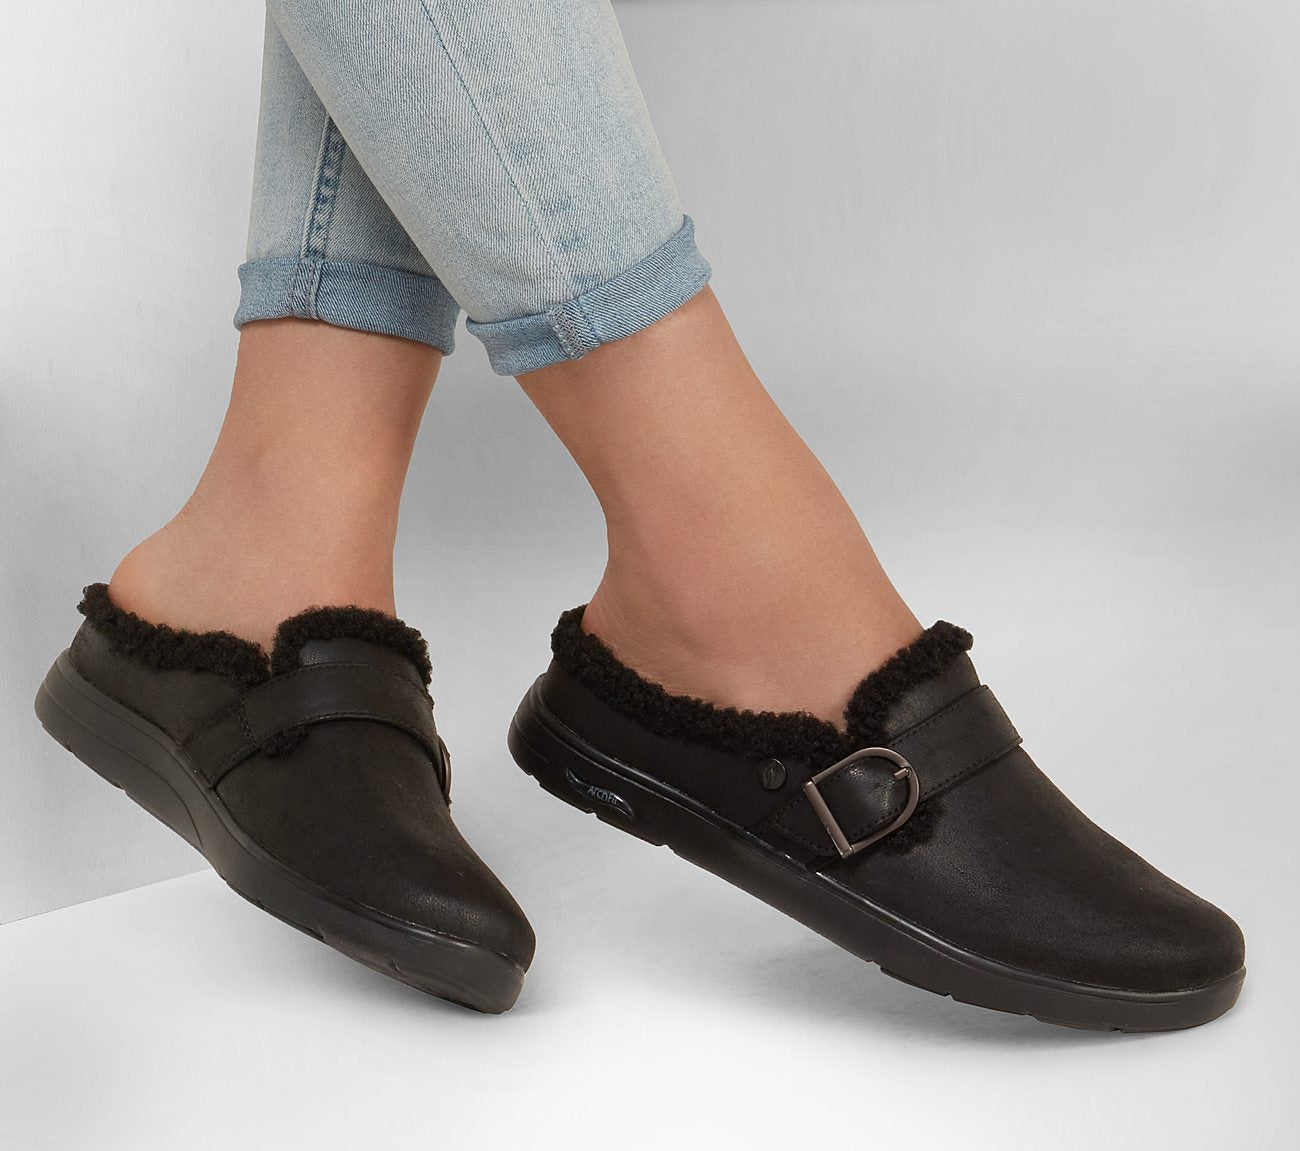 Arch Fit Lounge - Laid Back Slipper Skechers